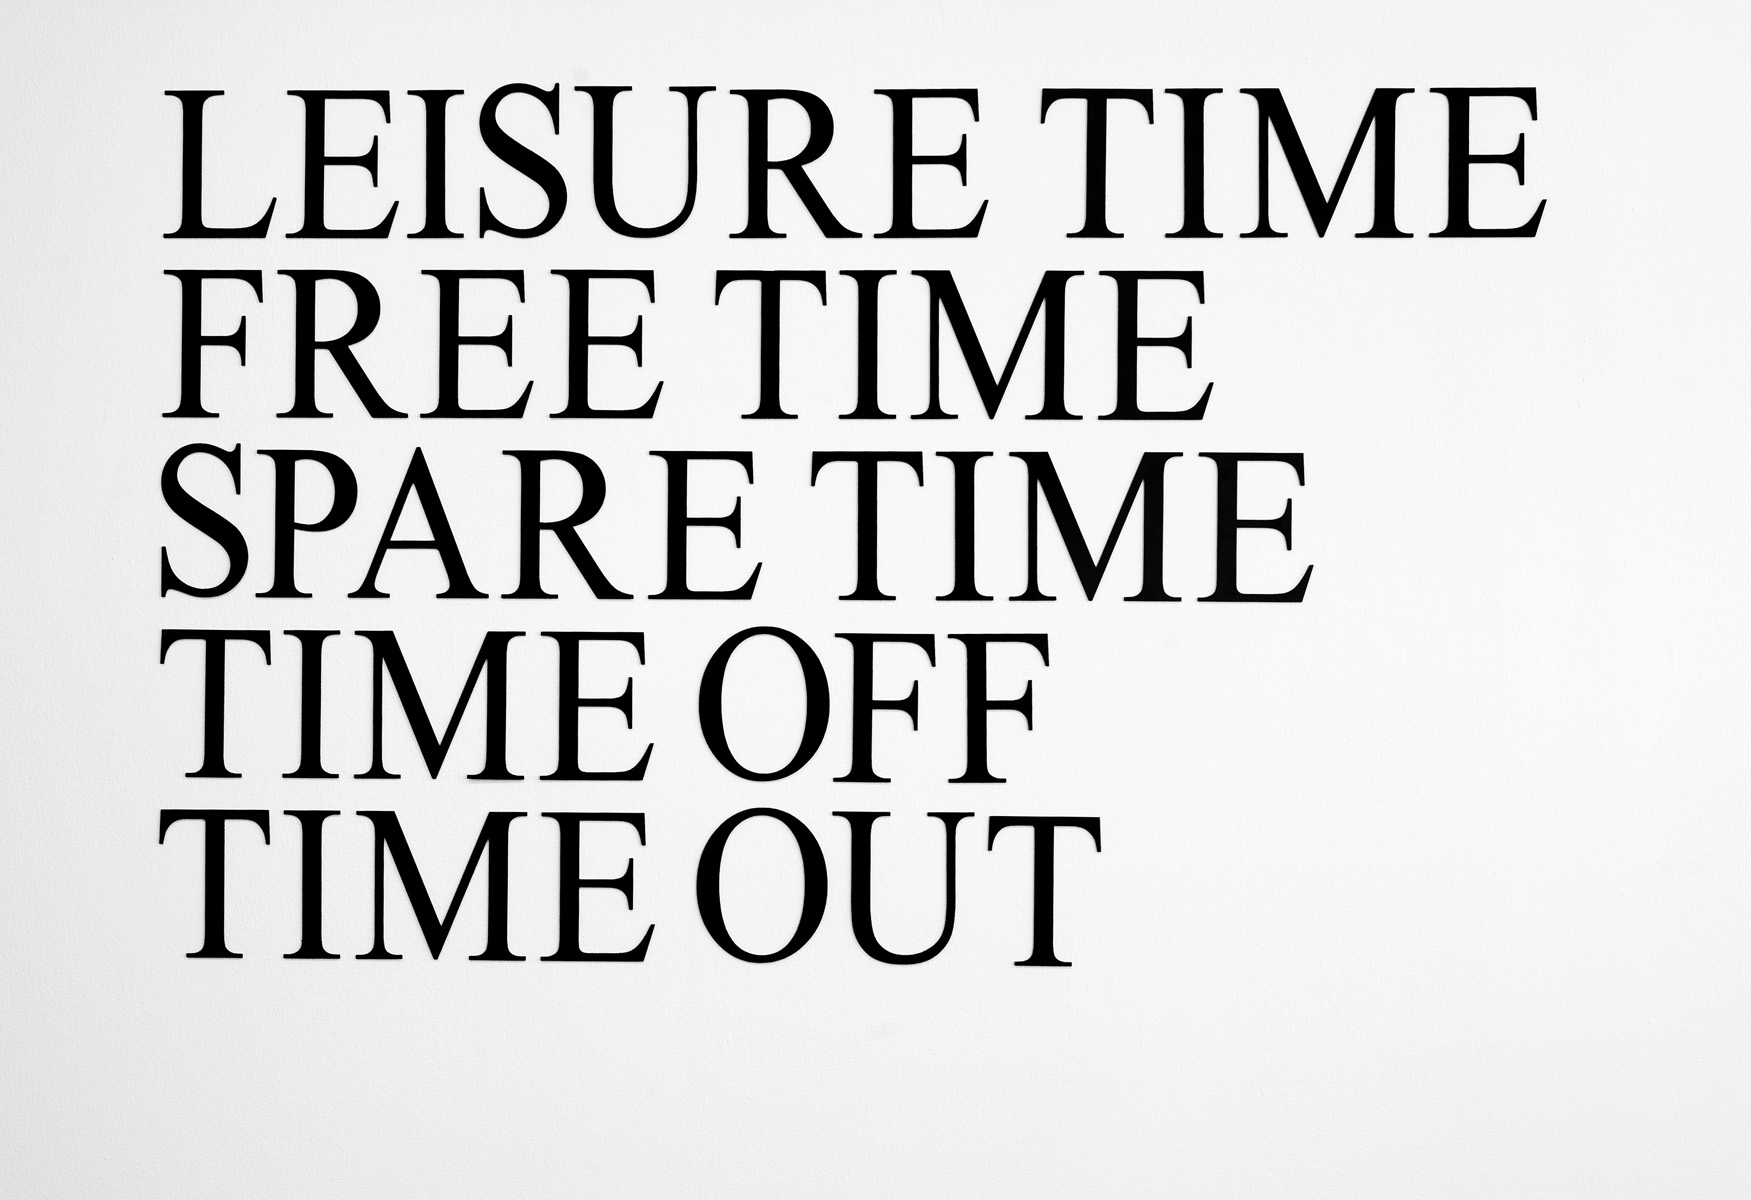 Simon Gush - Leisure Time, Free Time, Spare Time, Time Off, Time Out, 2015